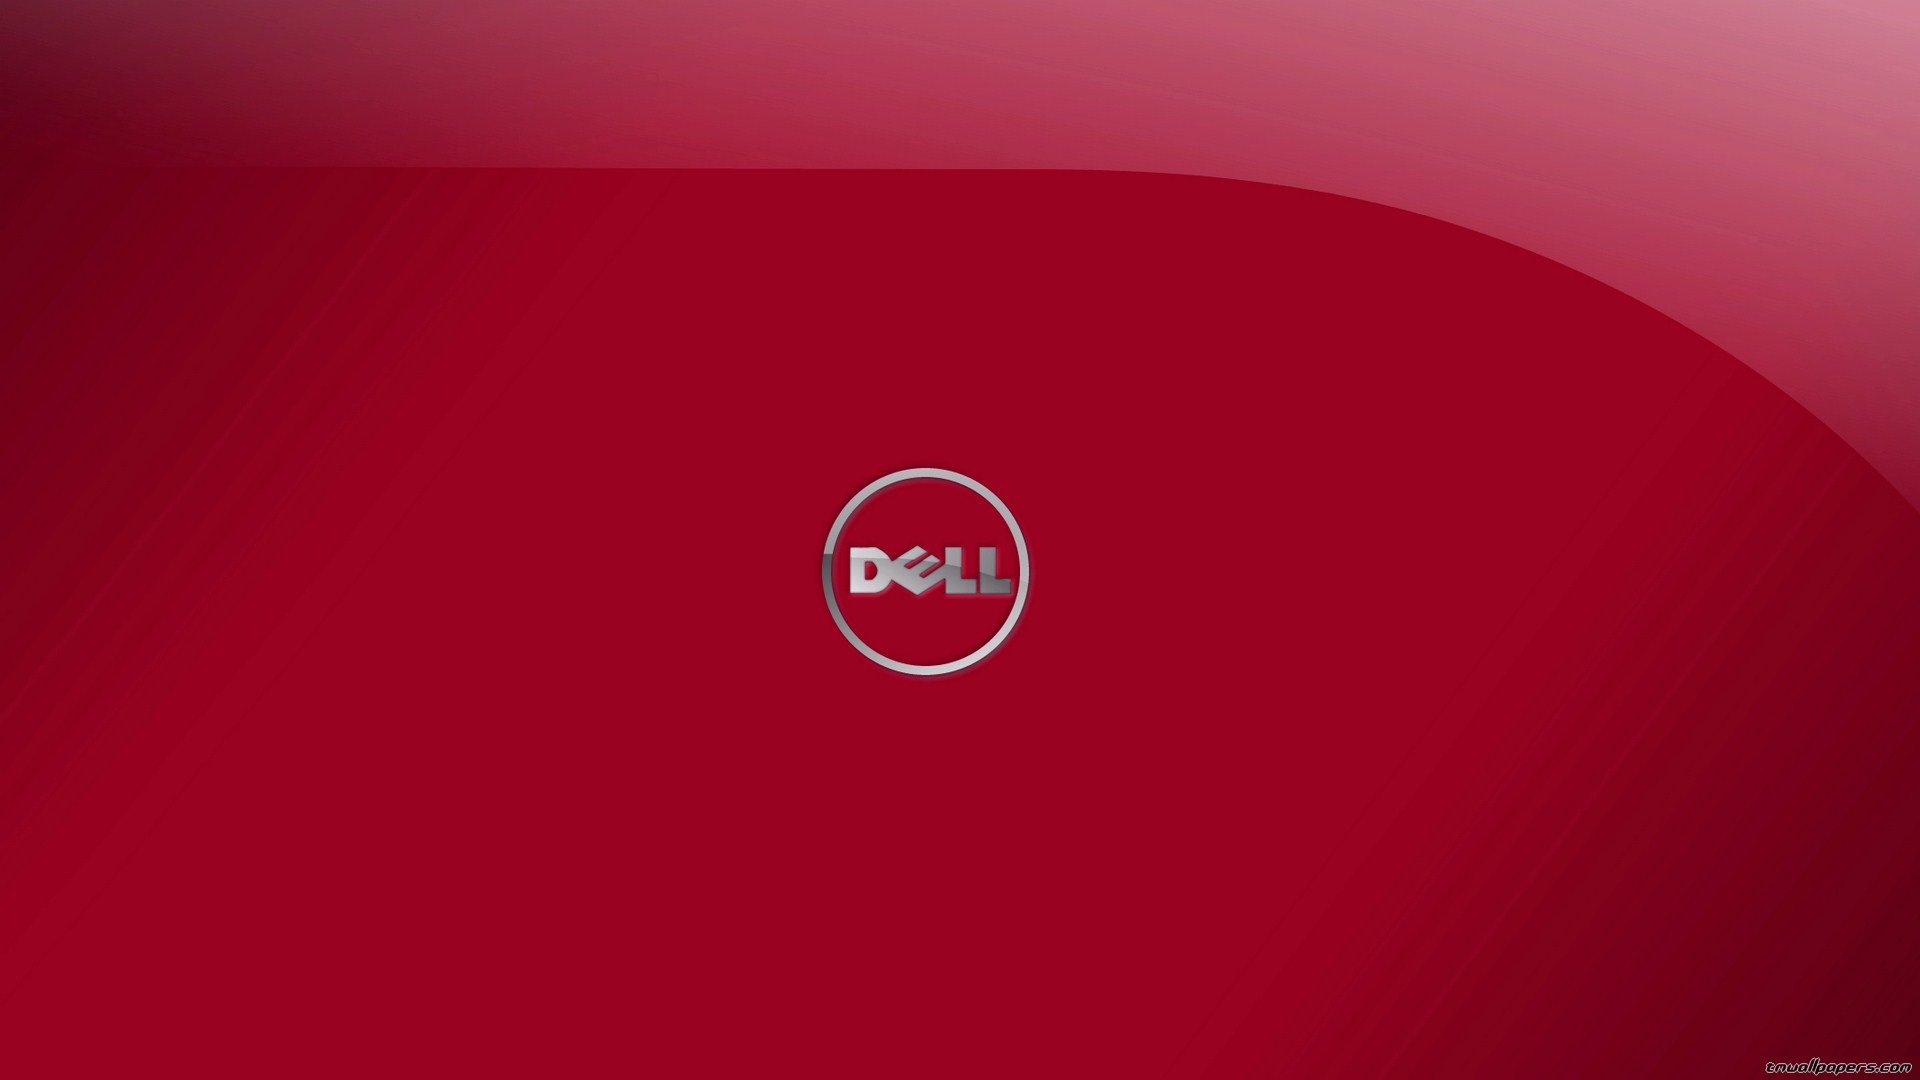 dell wallpaper 1366x768,red,text,maroon,pink,font